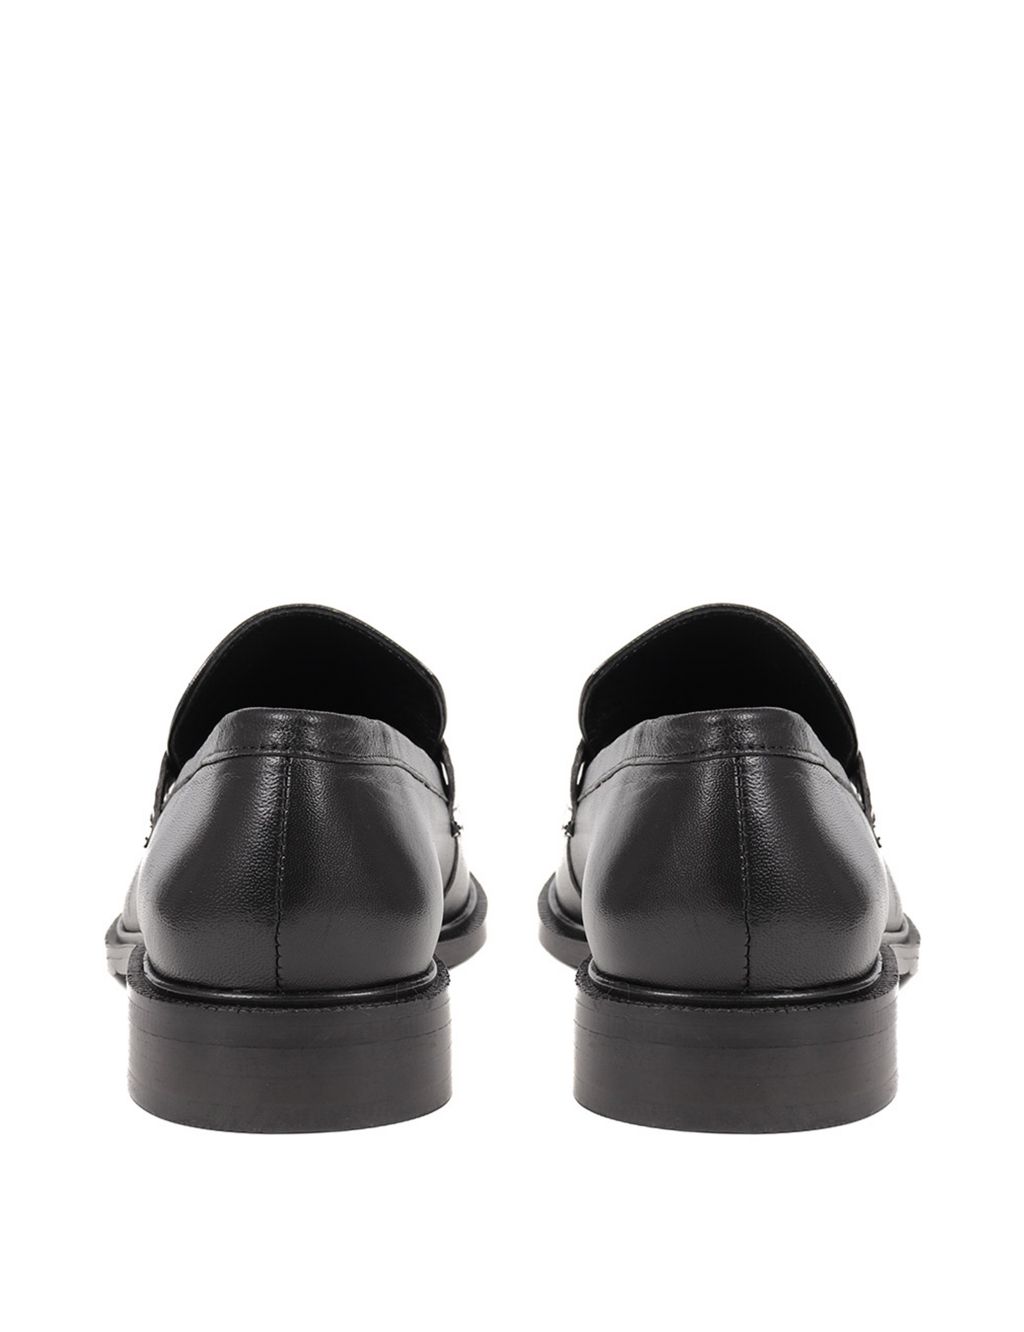 Leather Chain Detail Flat Loafers image 4